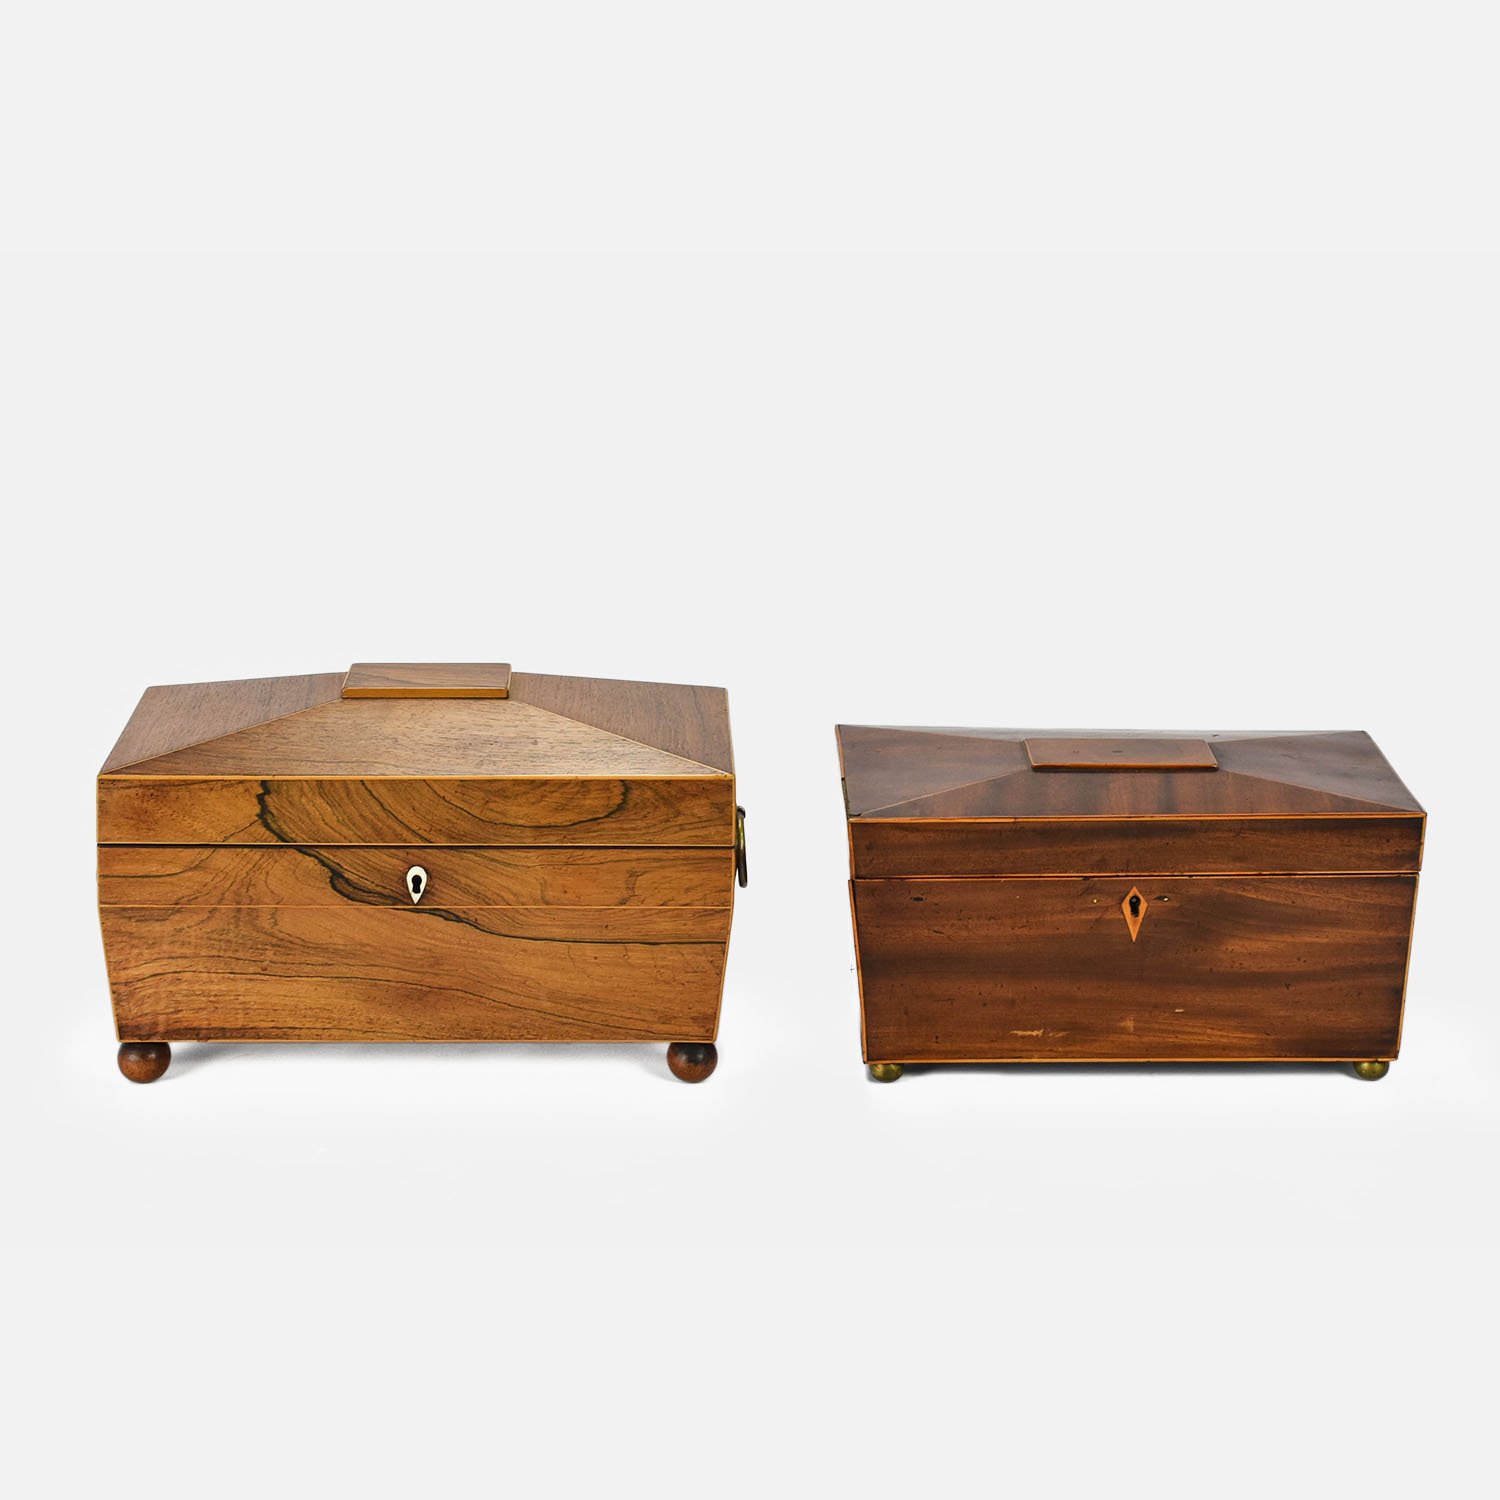 Two Antique Tea Caddy Boxes Olive Wood